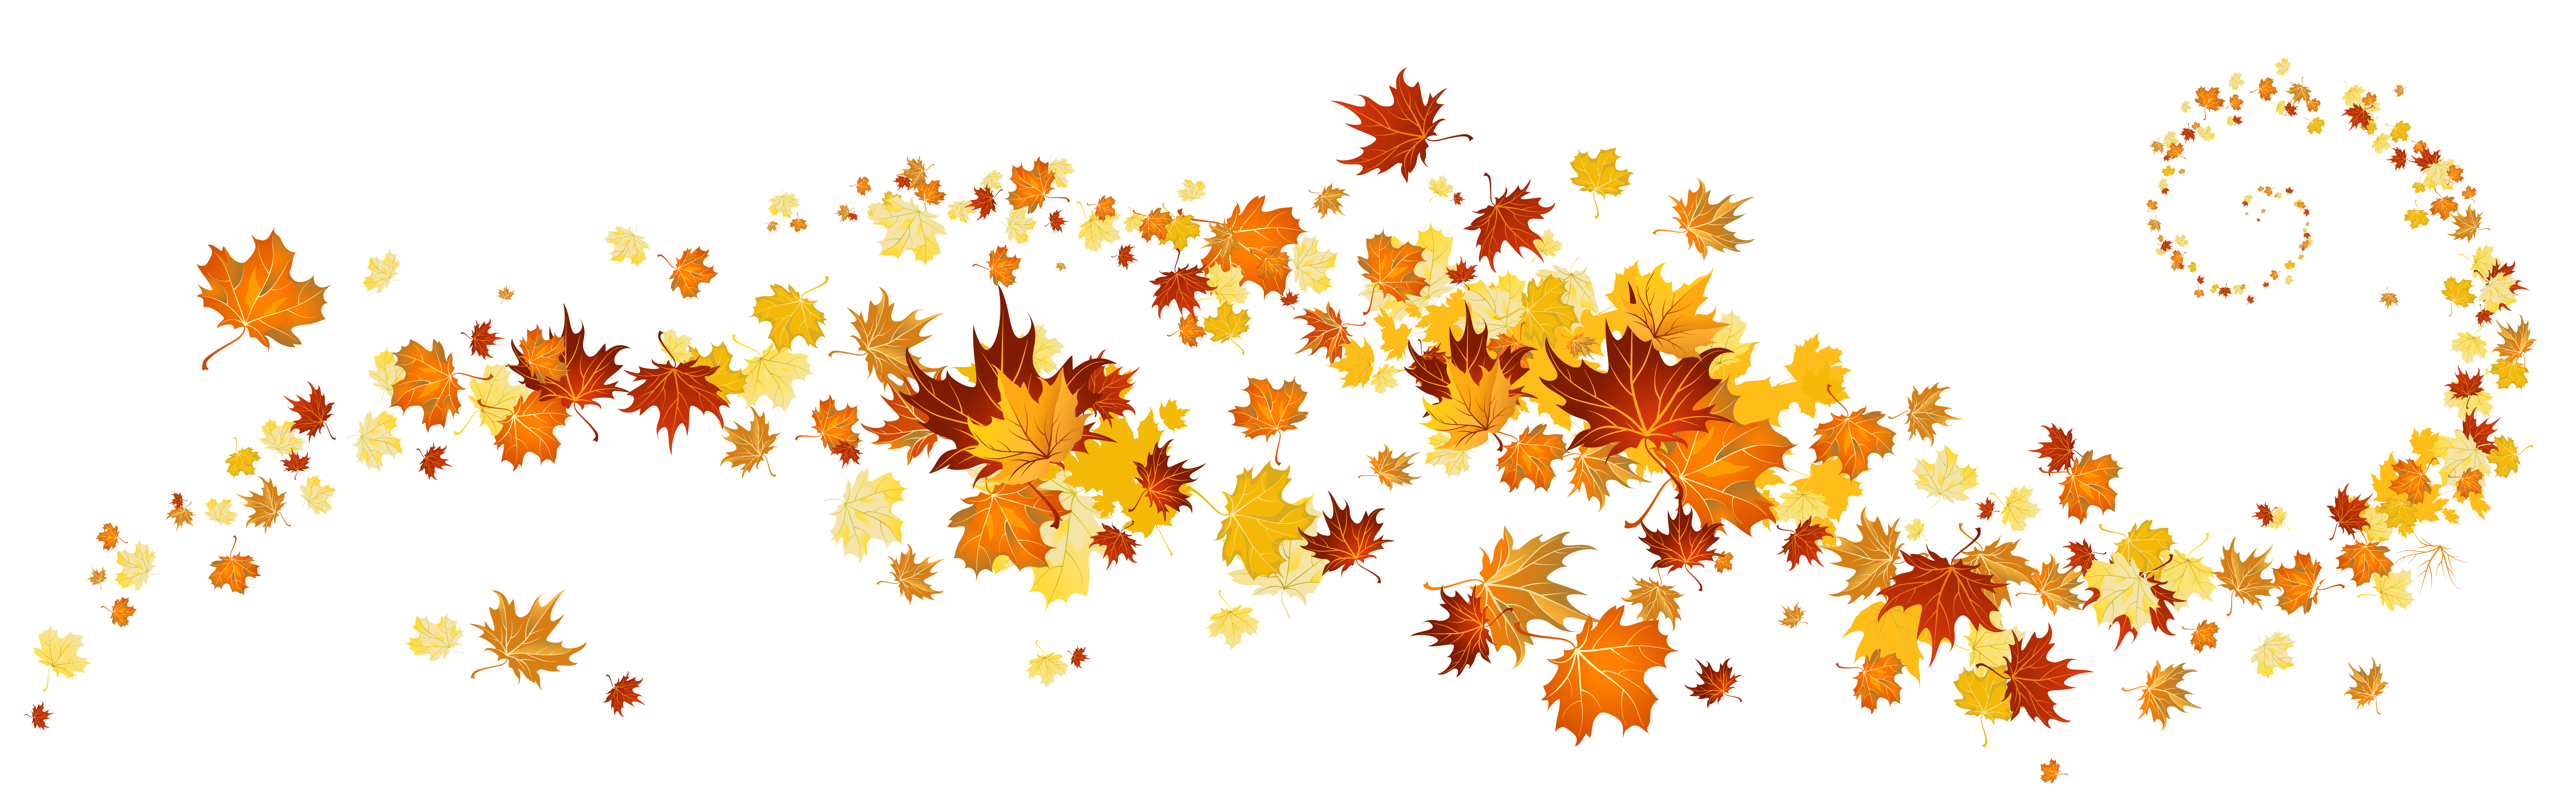 Clipart gallery autumn.  collection of october